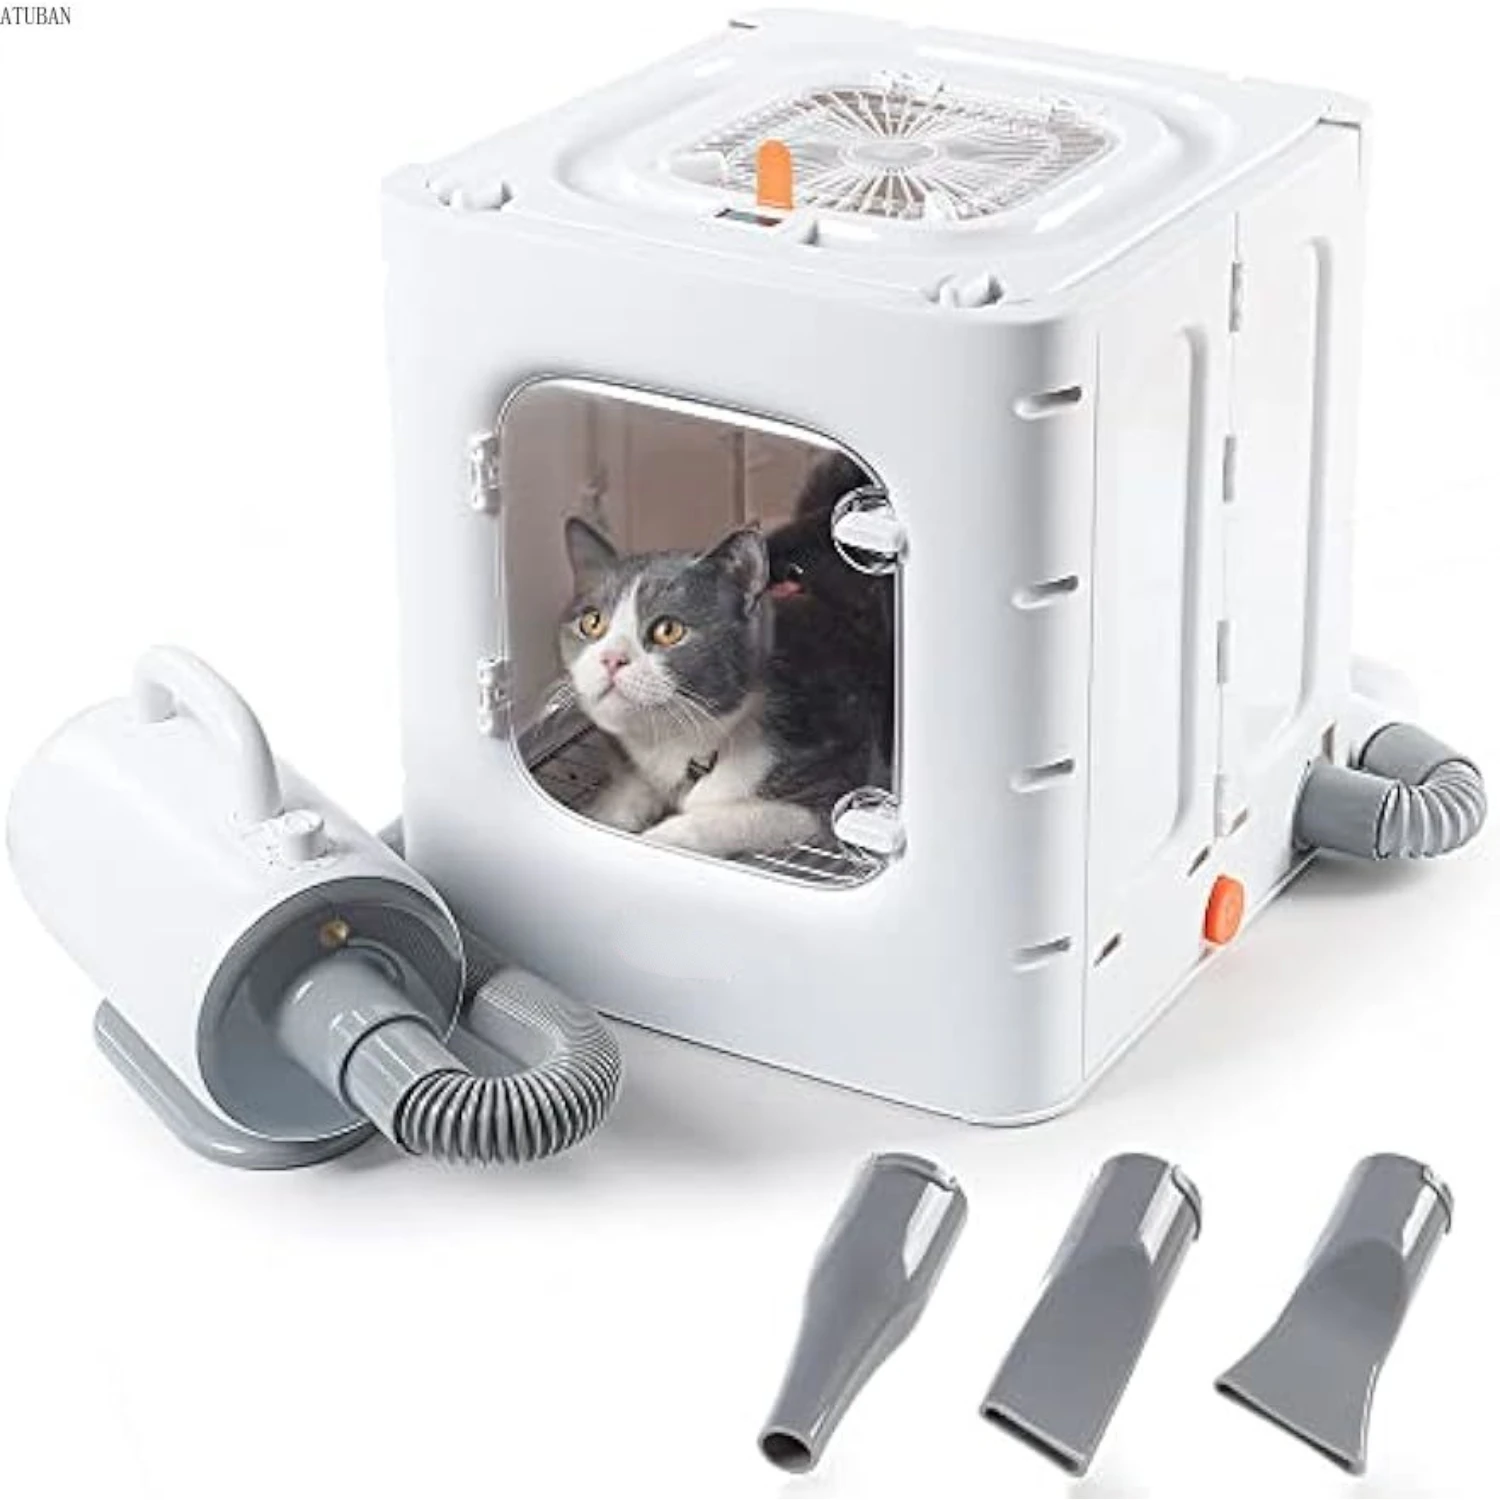 Pet Hair Dryer Grooming Blower Foldable Separated Cat Blow Dryer Box 62L Capacity for Cats and Small Dogs,Fast Pet Drying Blower